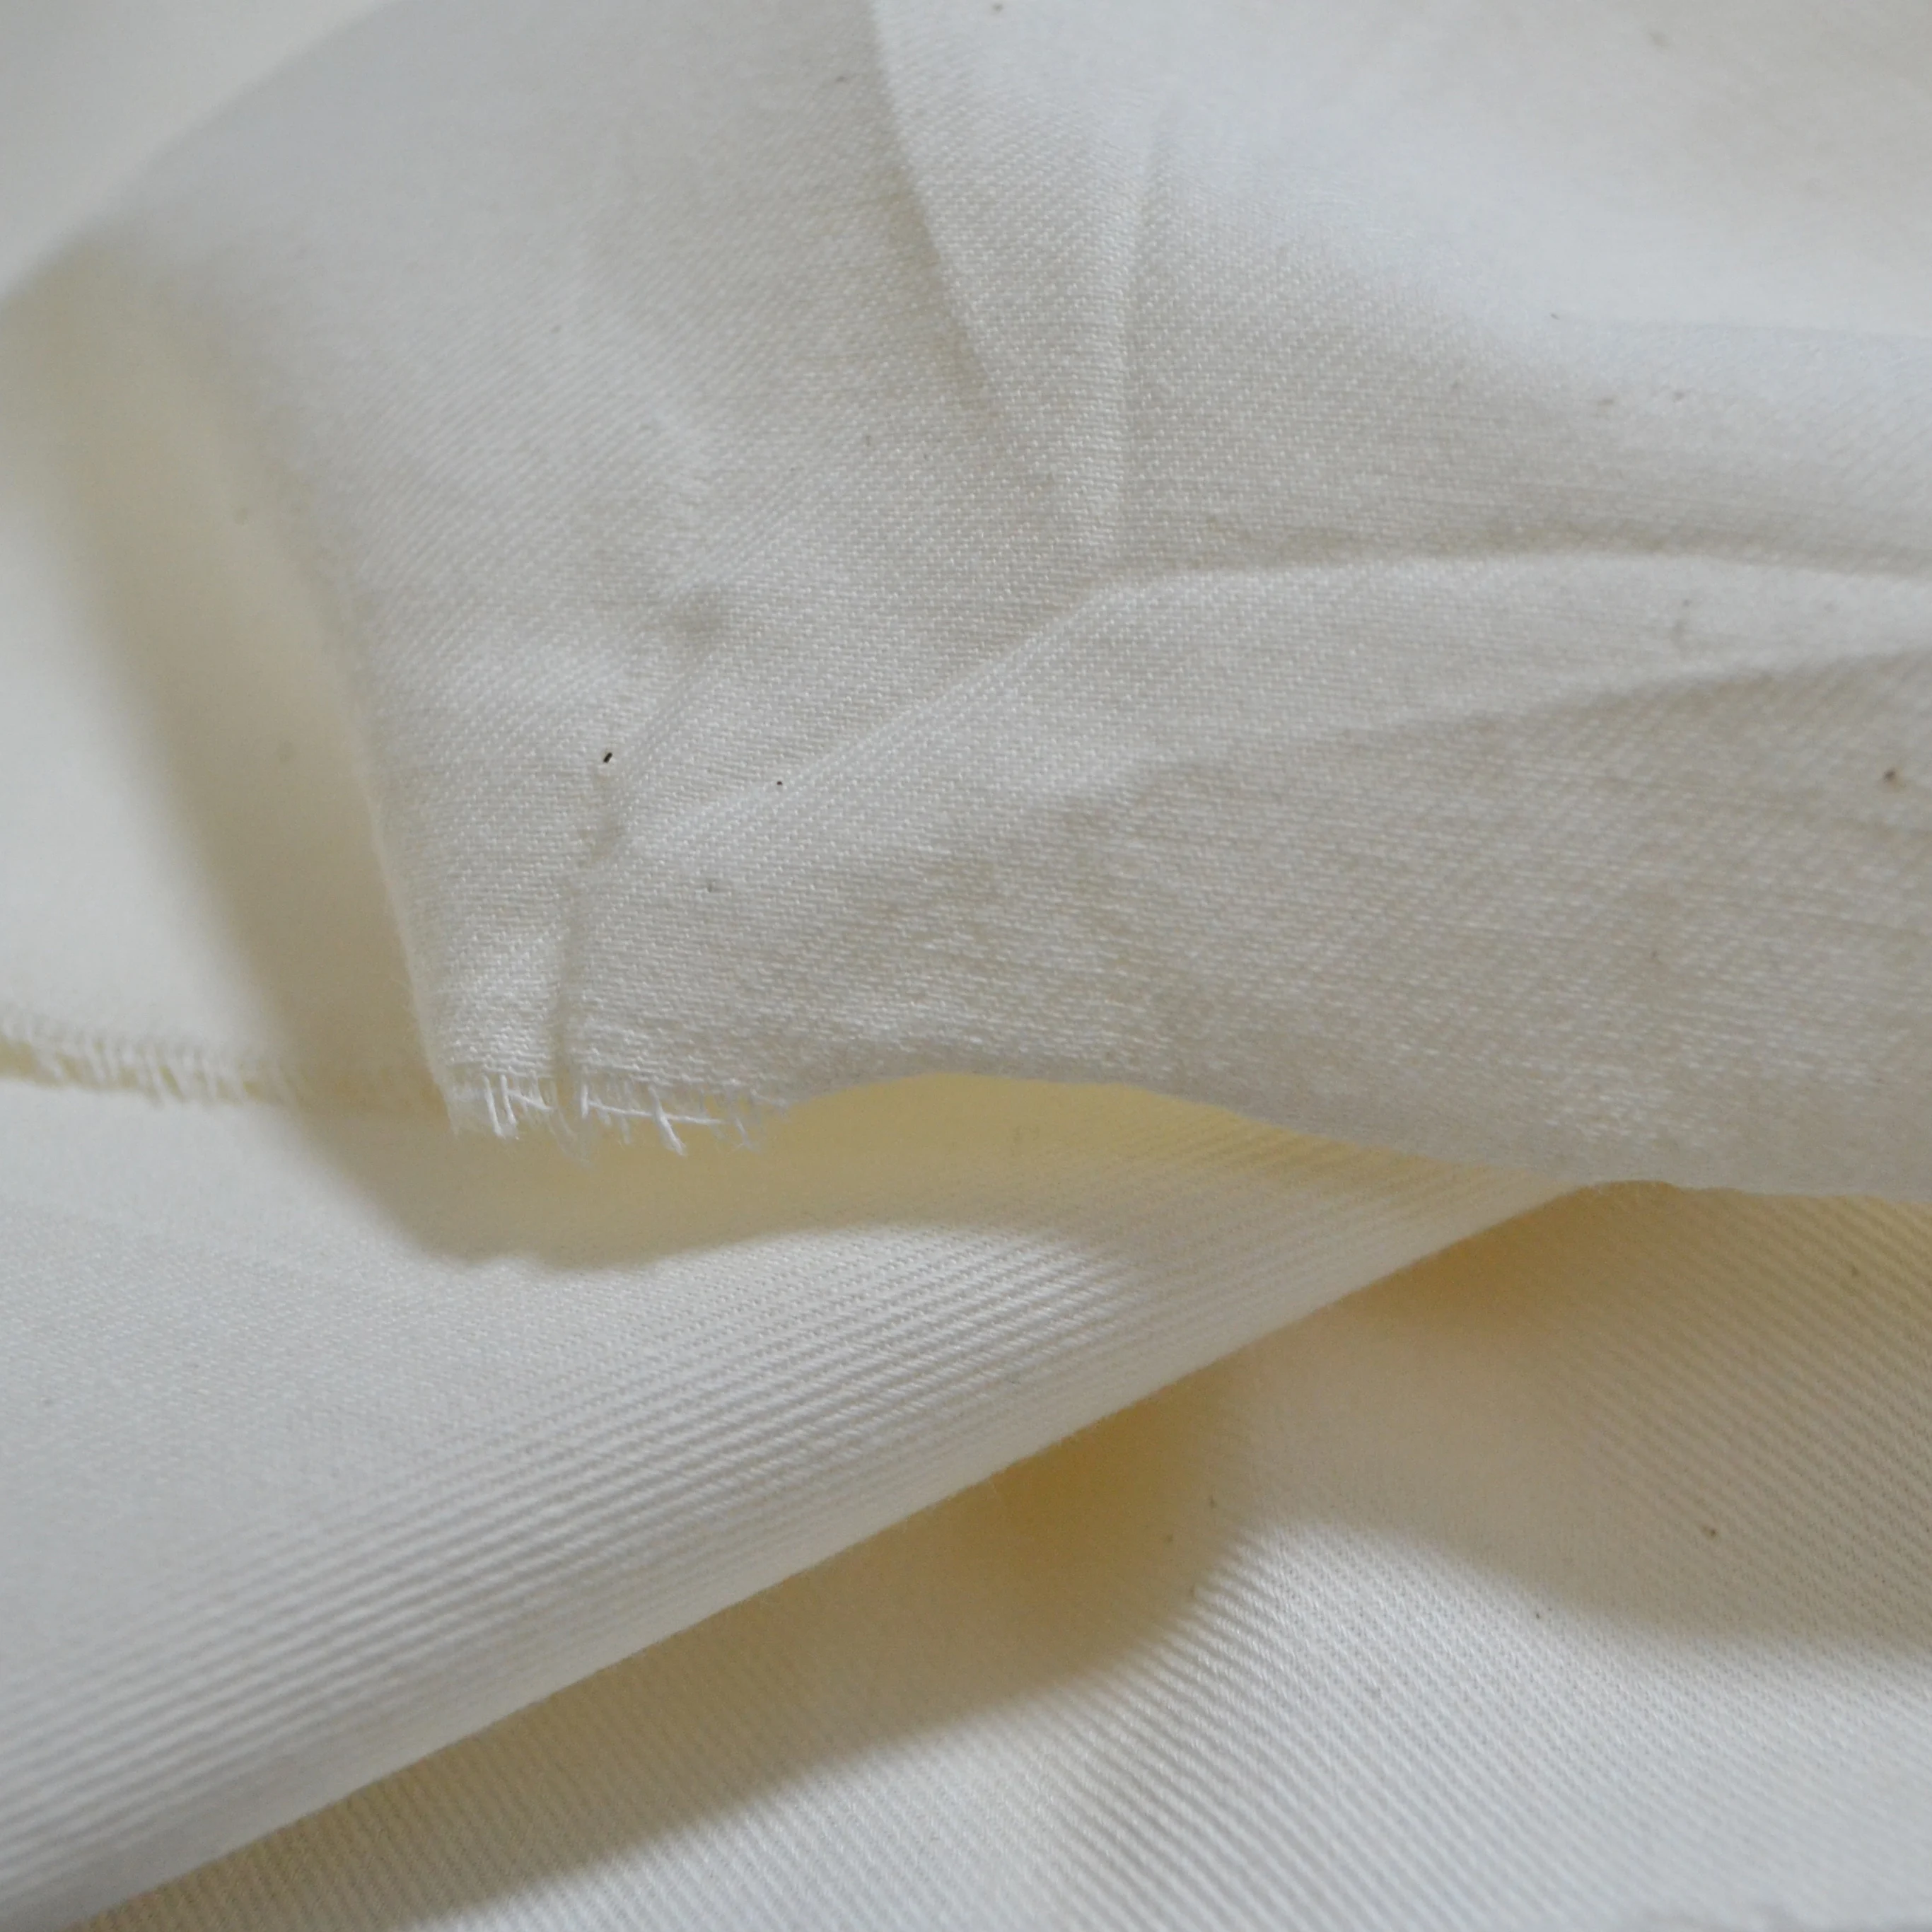 Tc poplin greige fabric combed quality workwear woven polyester 65% cotton 35% unbleached greige fabrics (1600413584362)